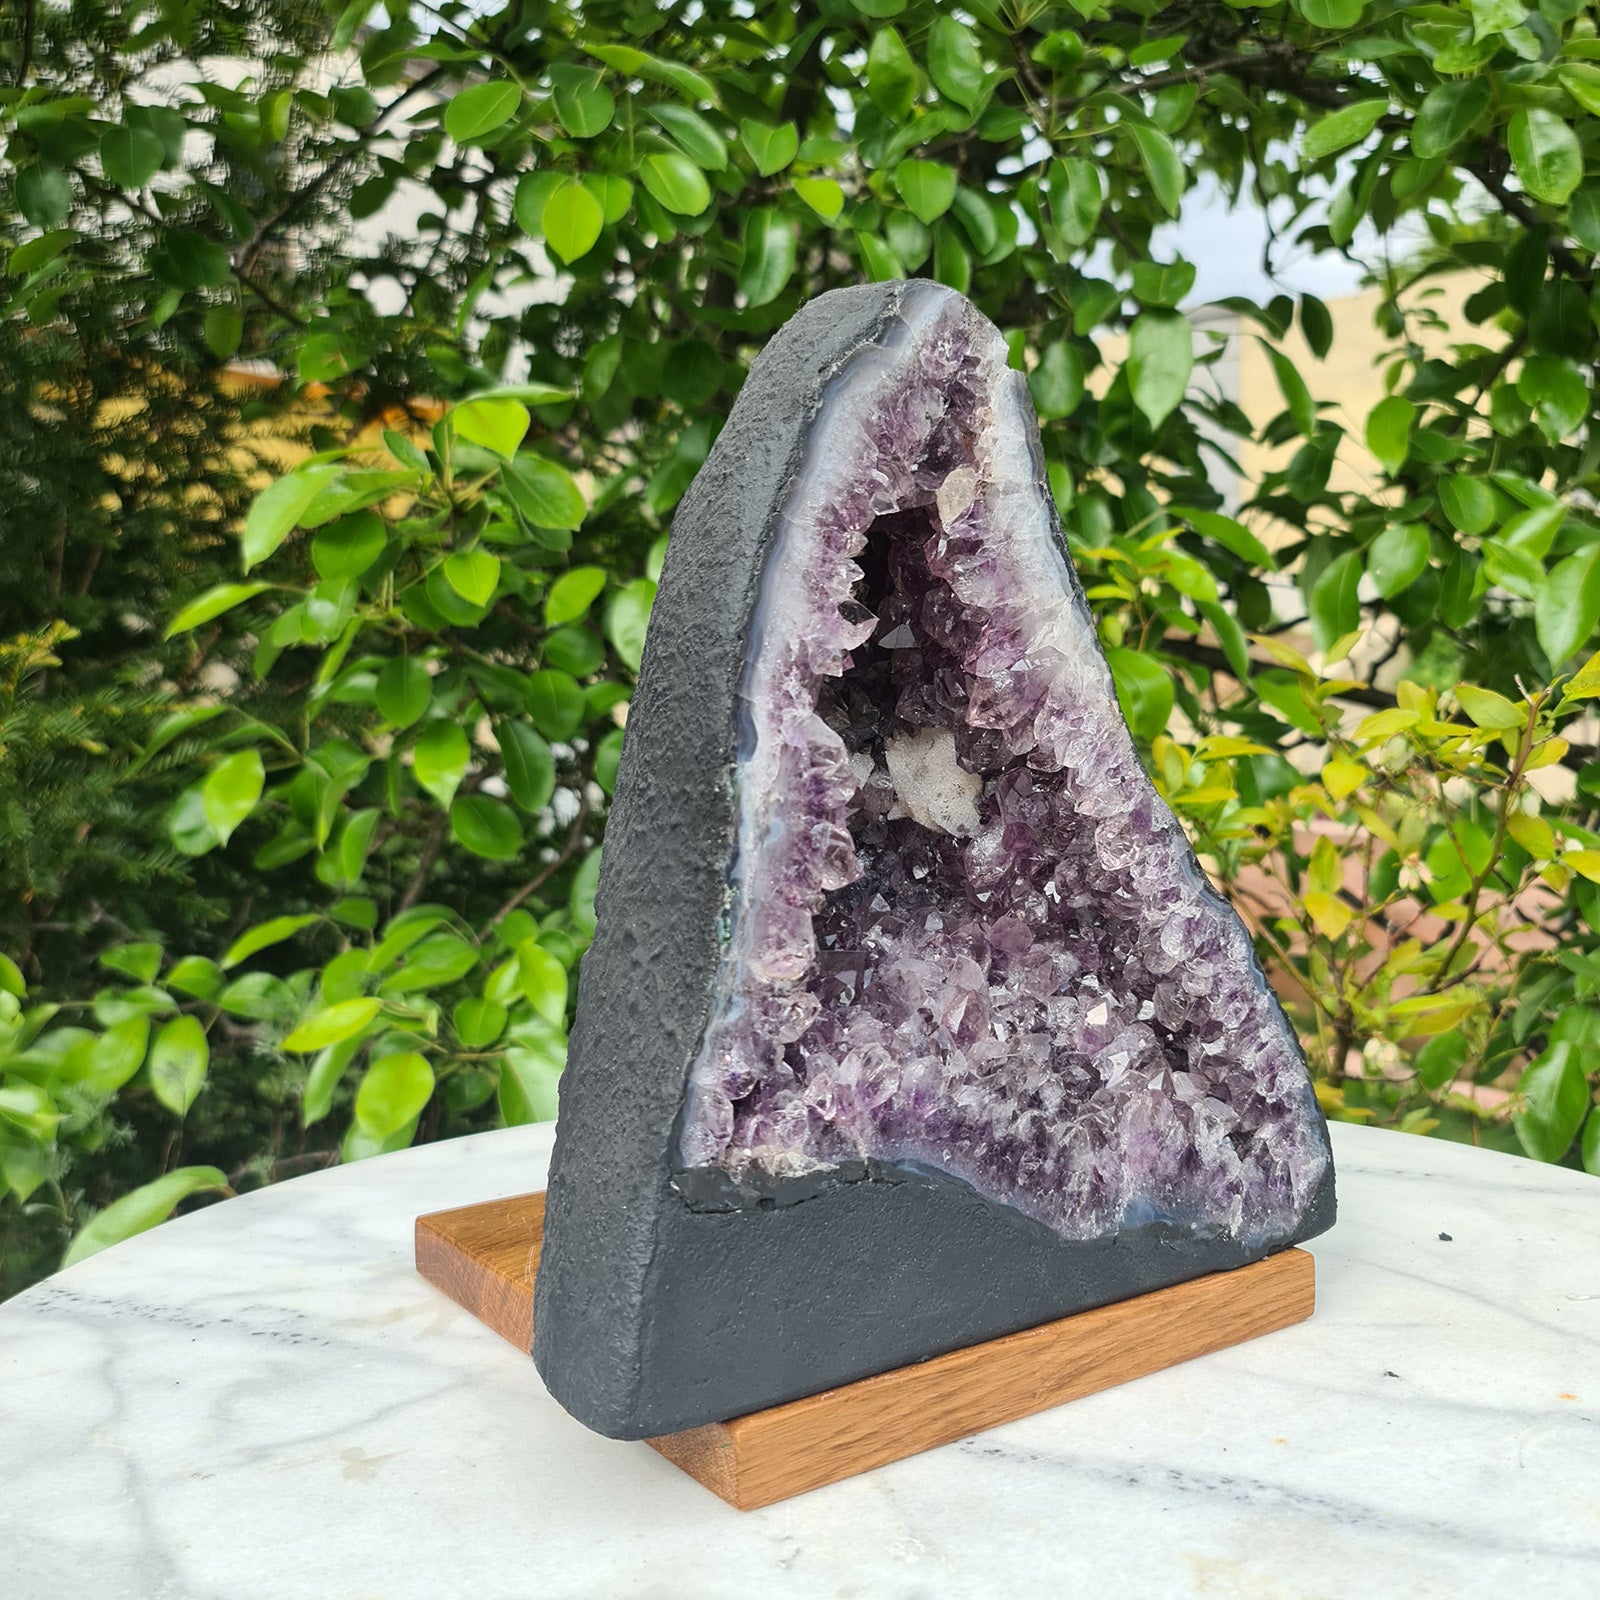 Amethyst druse - harmony, transformation and relaxation - UNIKAT No. 283